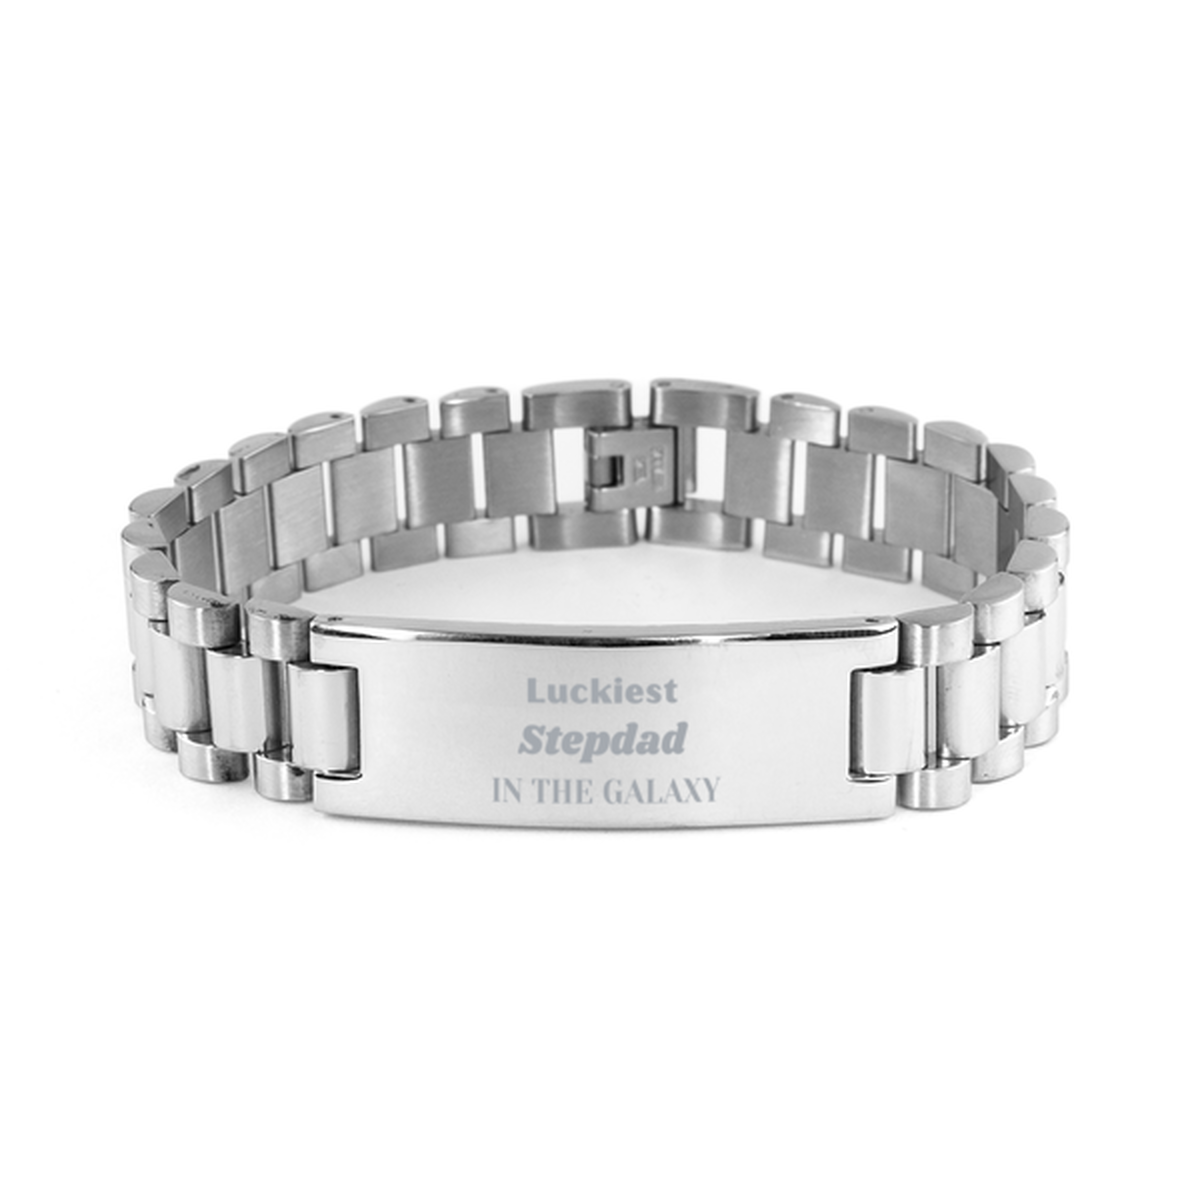 Luckiest Stepdad in the Galaxy, To My Stepdad Engraved Gifts, Christmas Stepdad Ladder Stainless Steel Bracelet Gifts, X-mas Birthday Unique Gifts For Stepdad Men Women